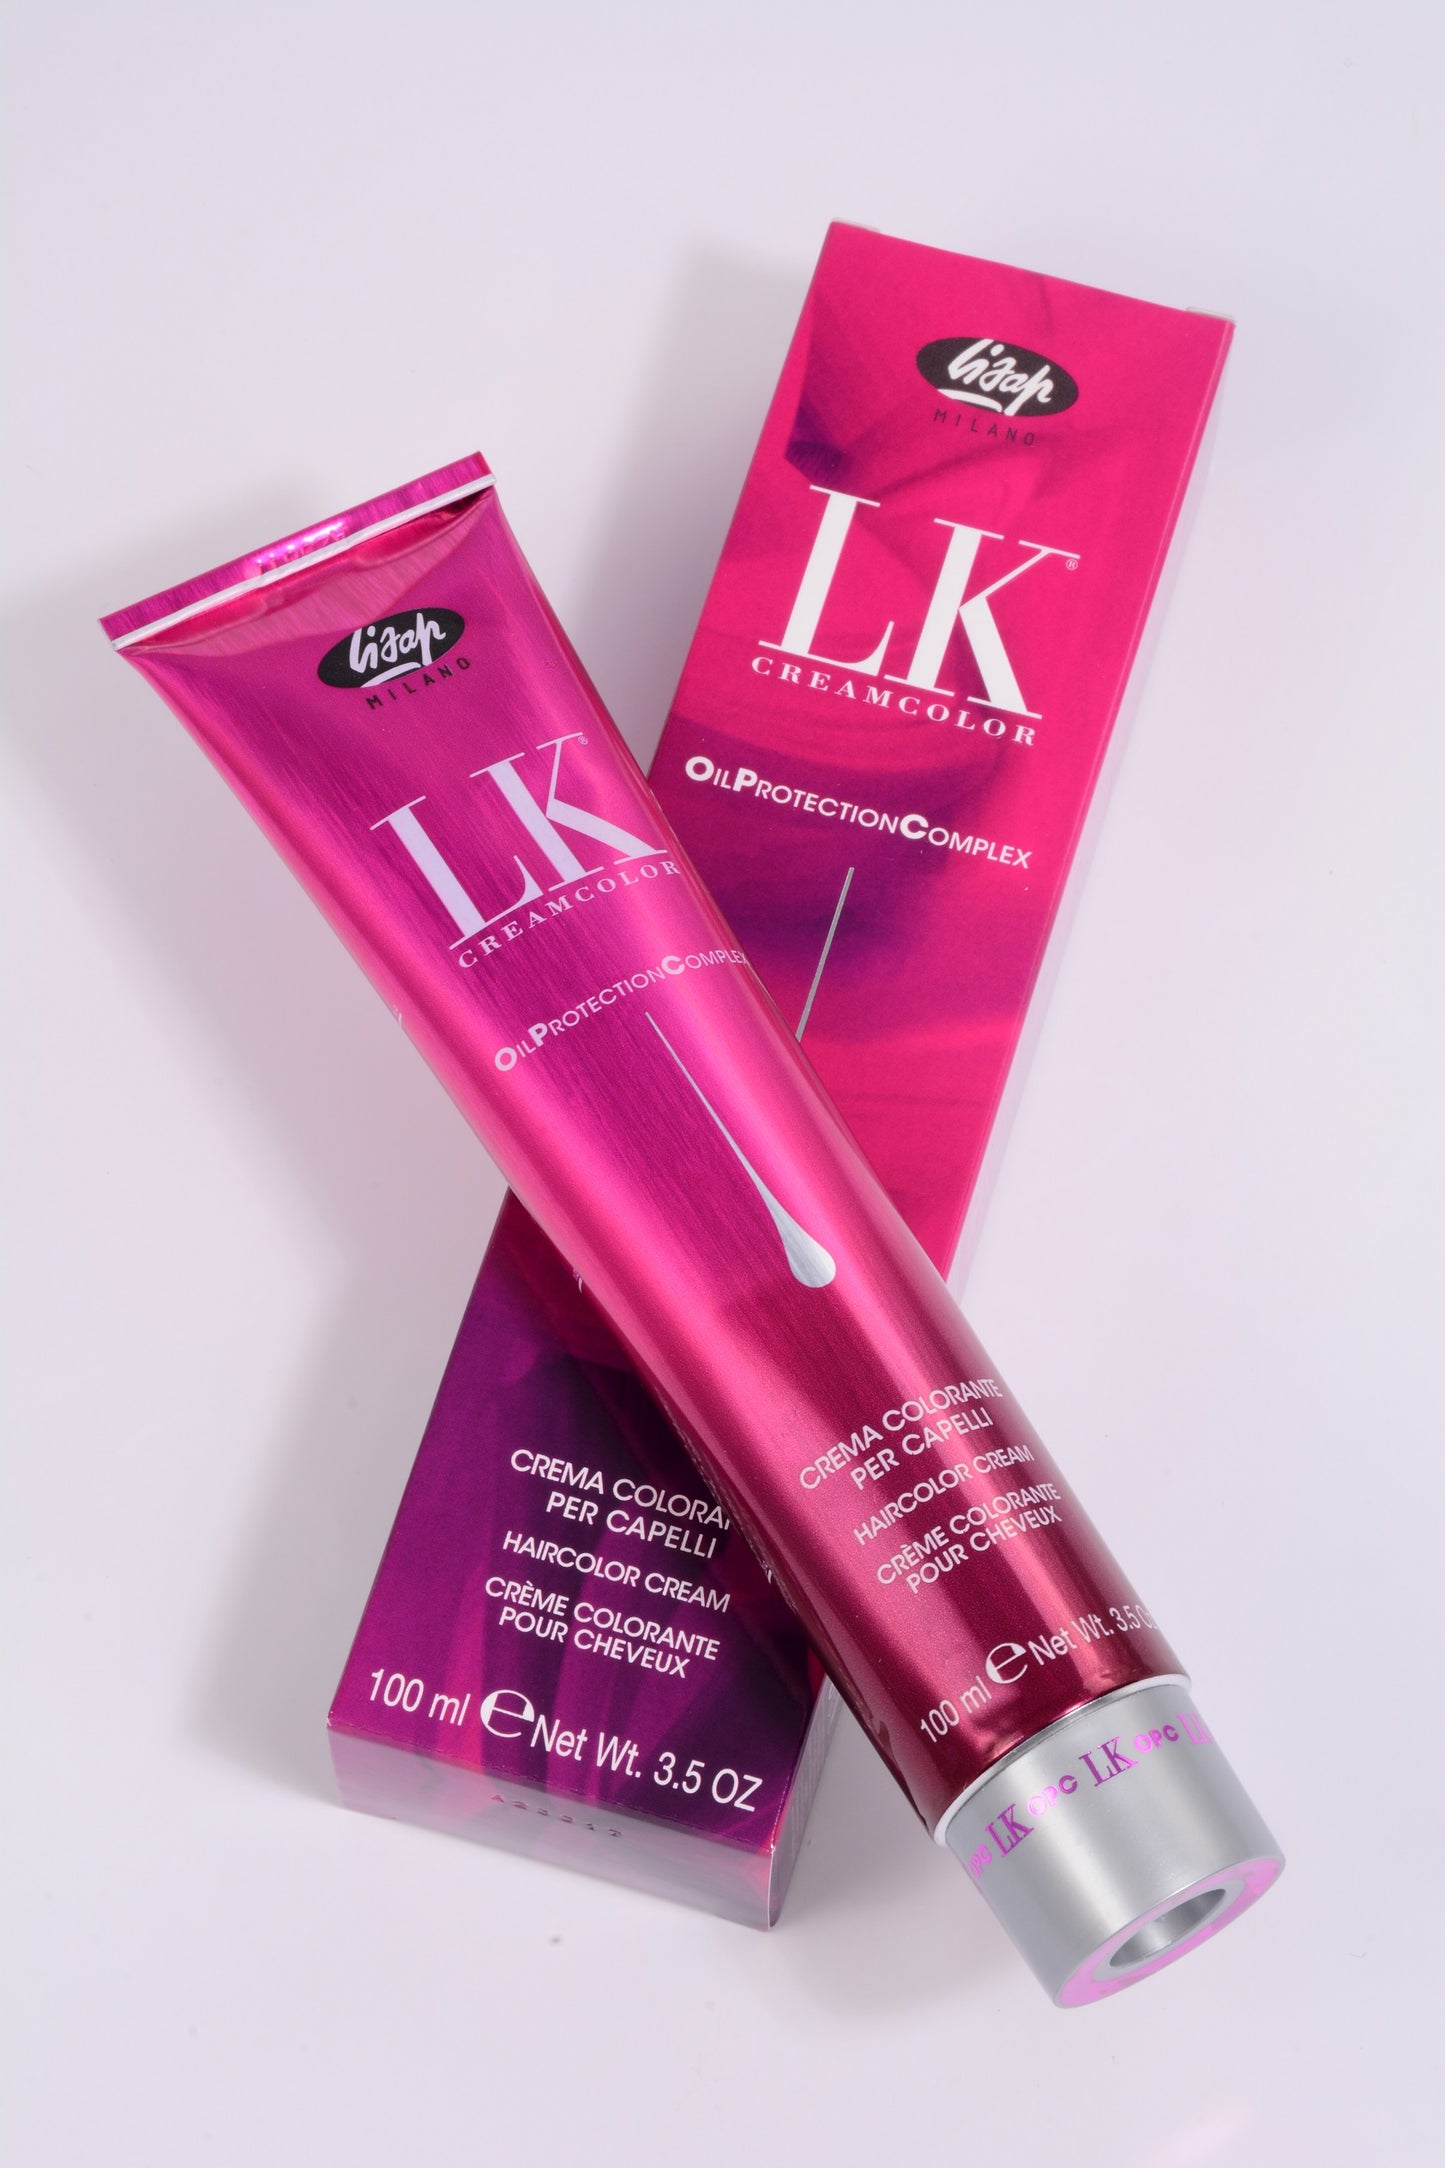 LK Creamcolor 5/23 Oil Protection Complex